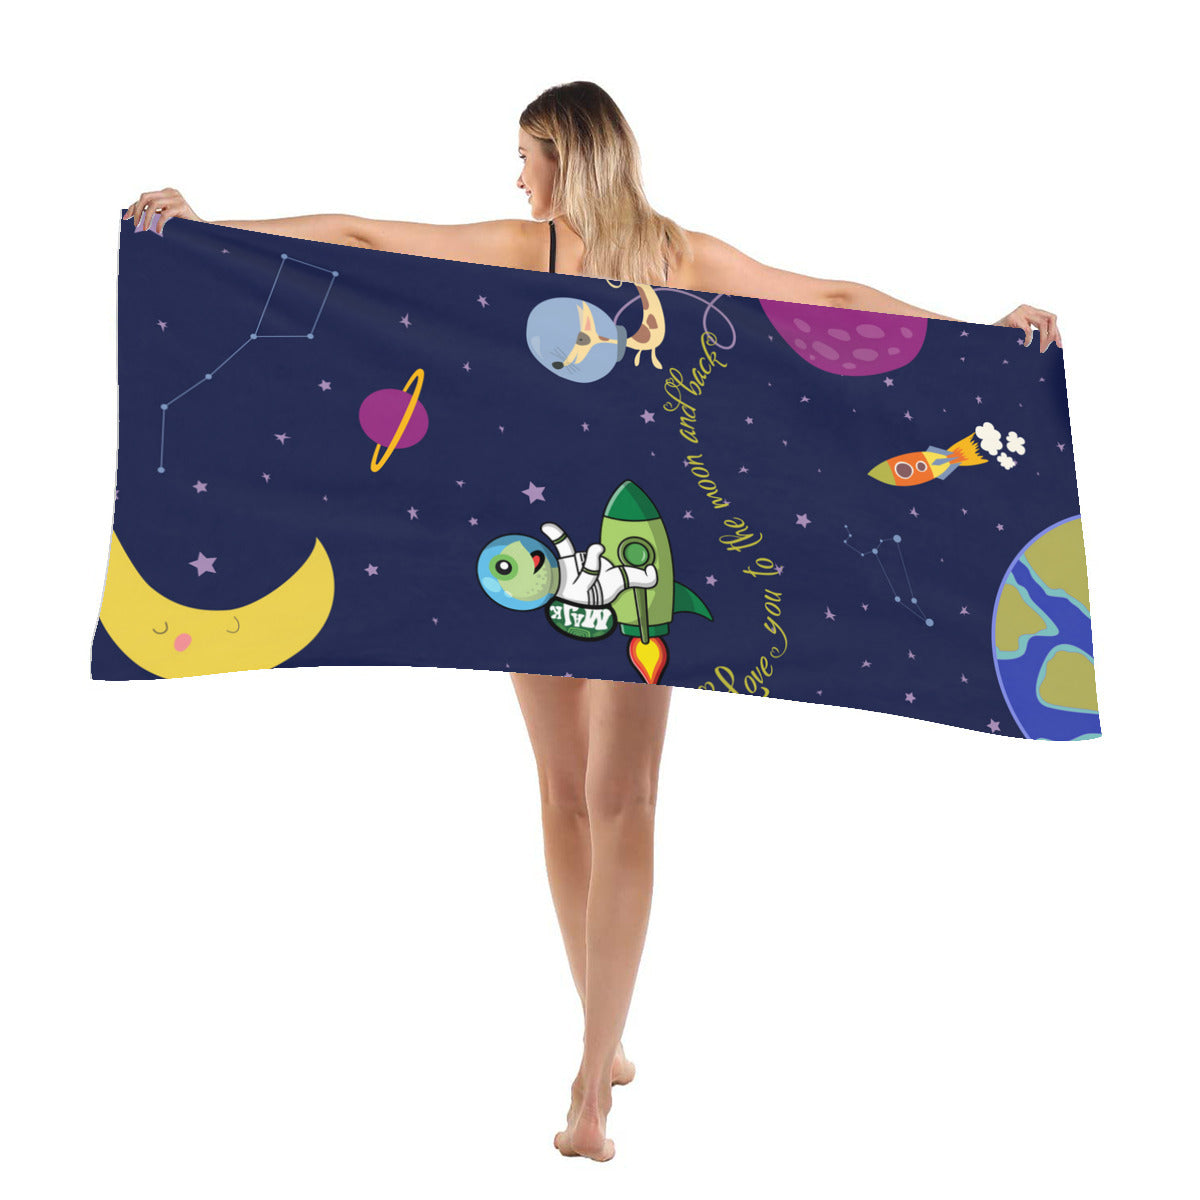 Beach Towel "Love You to the Moon and Back"